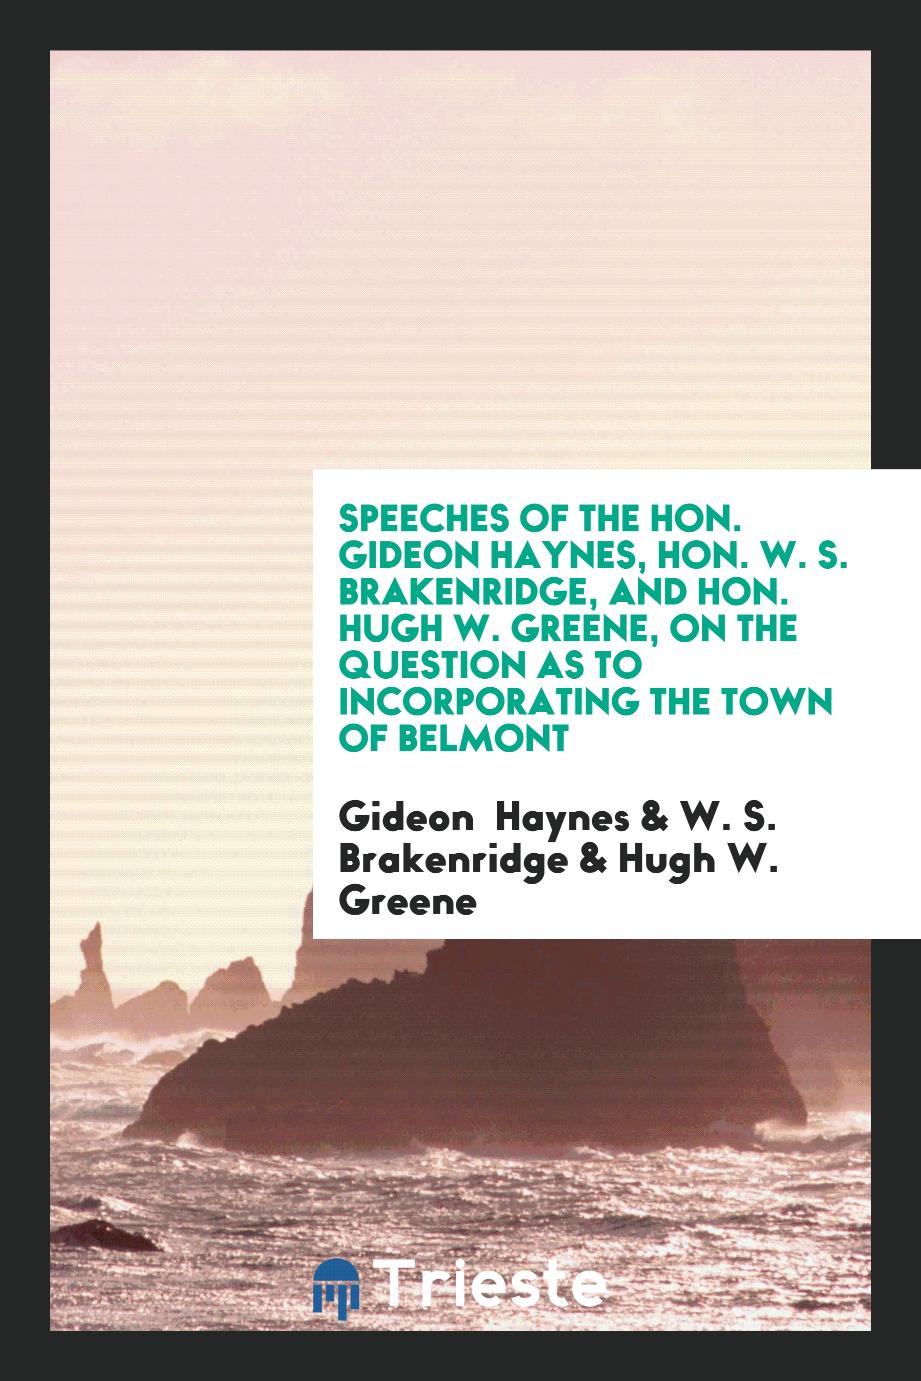 Speeches of the Hon. Gideon Haynes, Hon. W. S. Brakenridge, and Hon. Hugh W. Greene, on the question as to incorporating the town of Belmont